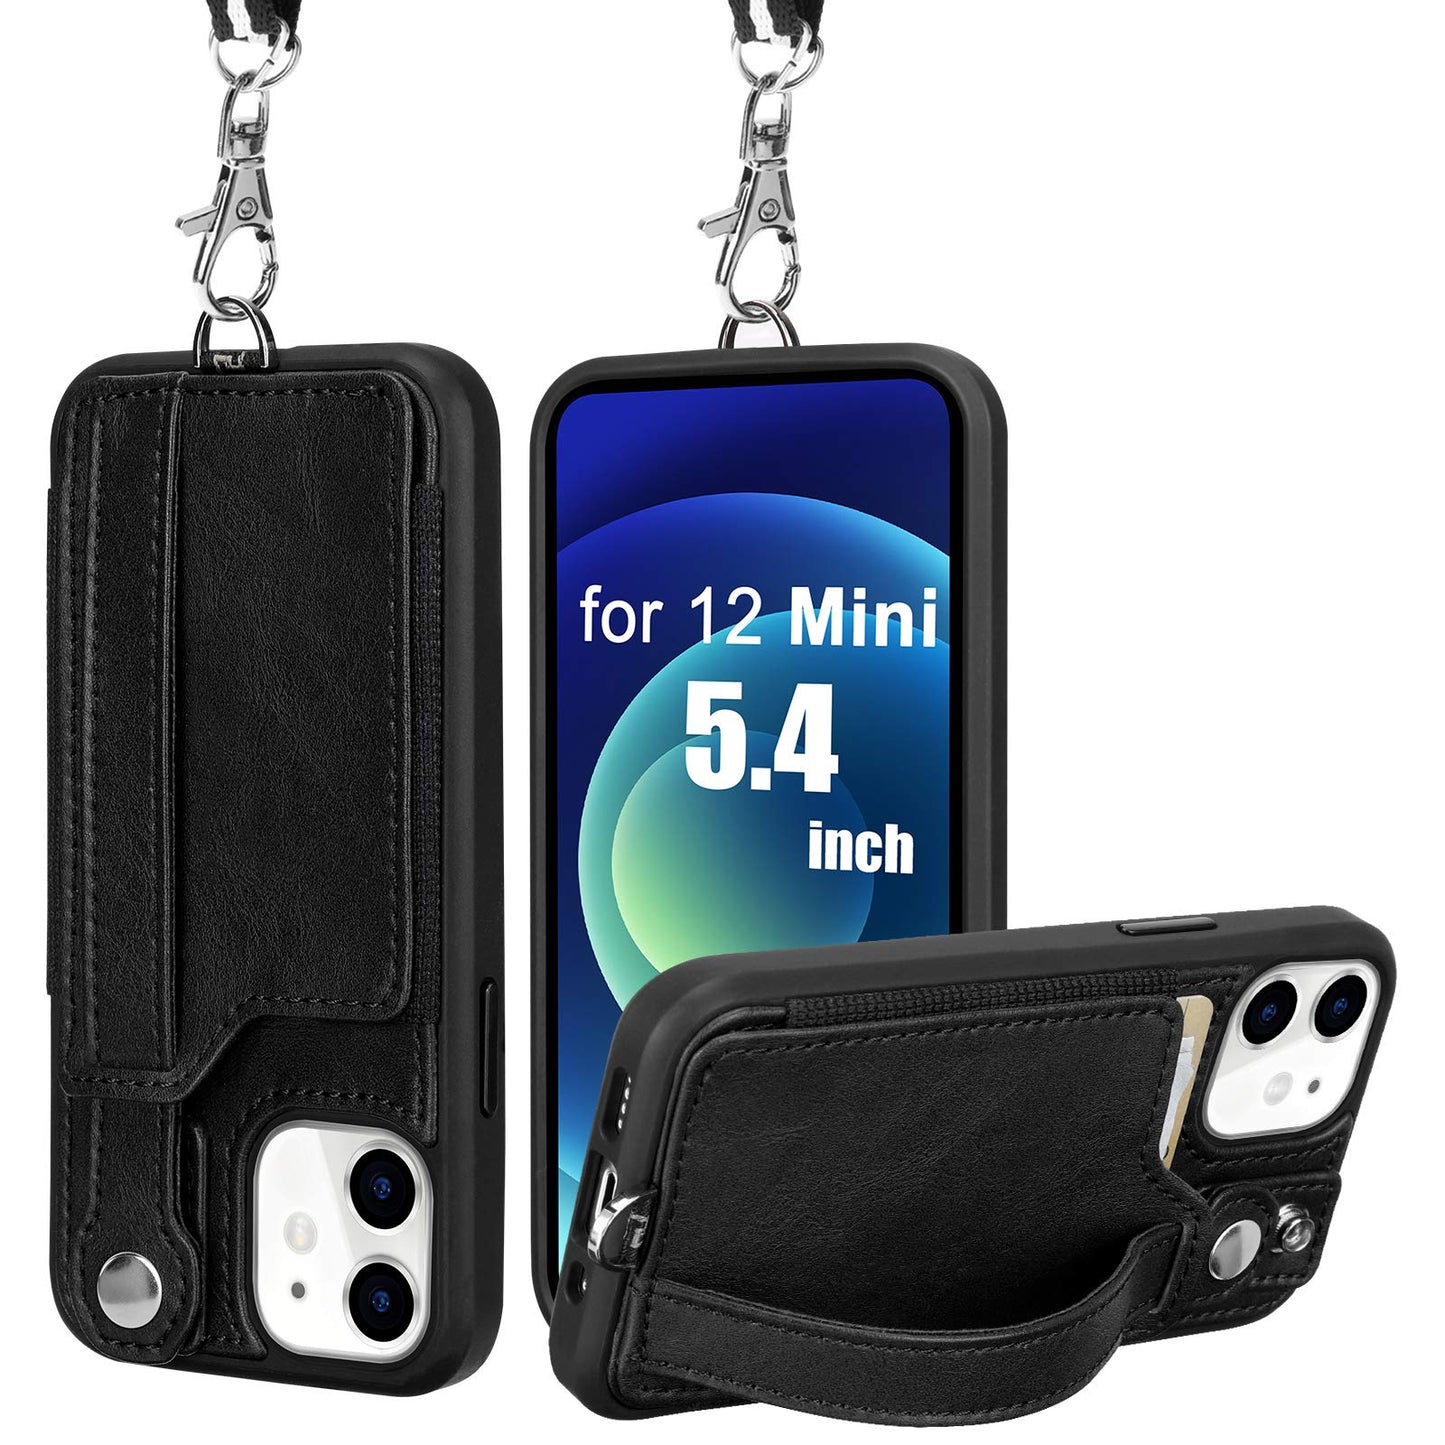 TOOVREN iPhone 12 Pro Max Case Wallet, iPhone 12 Pro Max Lanyard Case with Leather Card Holder Kickstand Neck Strap Adjustable Necklace Protective Cases Cover for Apple iPhone 12 Pro Max